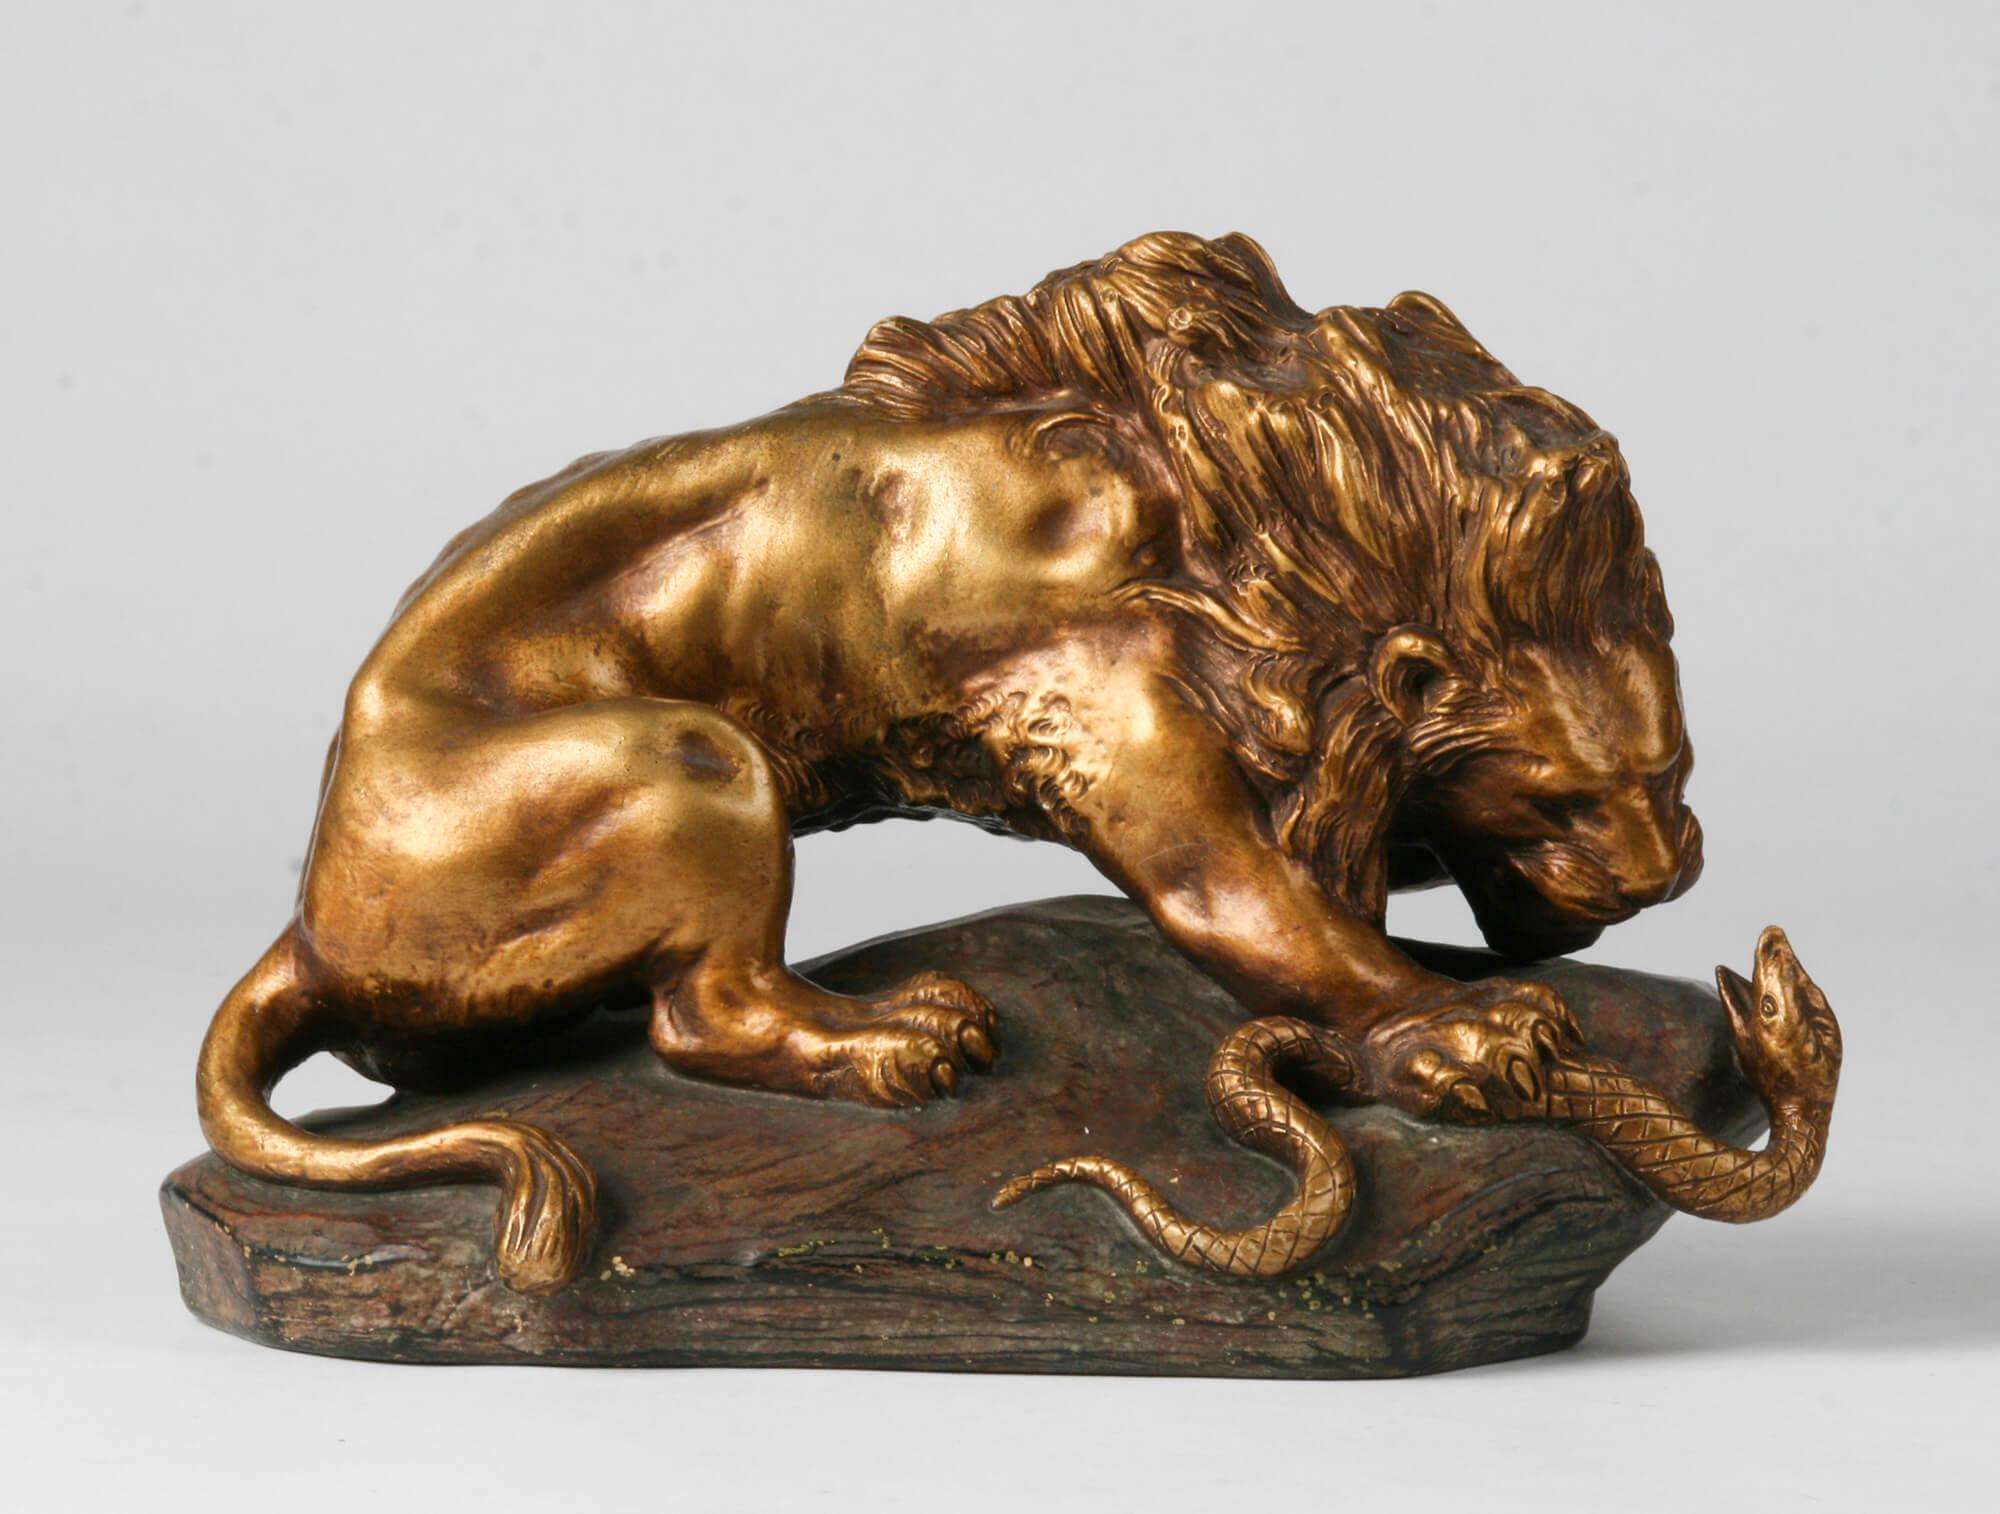 Powerful terracotta statue of a lion fighting a snake. The image is signed 'A. Fagotto'. This is an Italian sculptor who was very productive at the beginning of the 20th century.
The image is patinated in a bronze color.